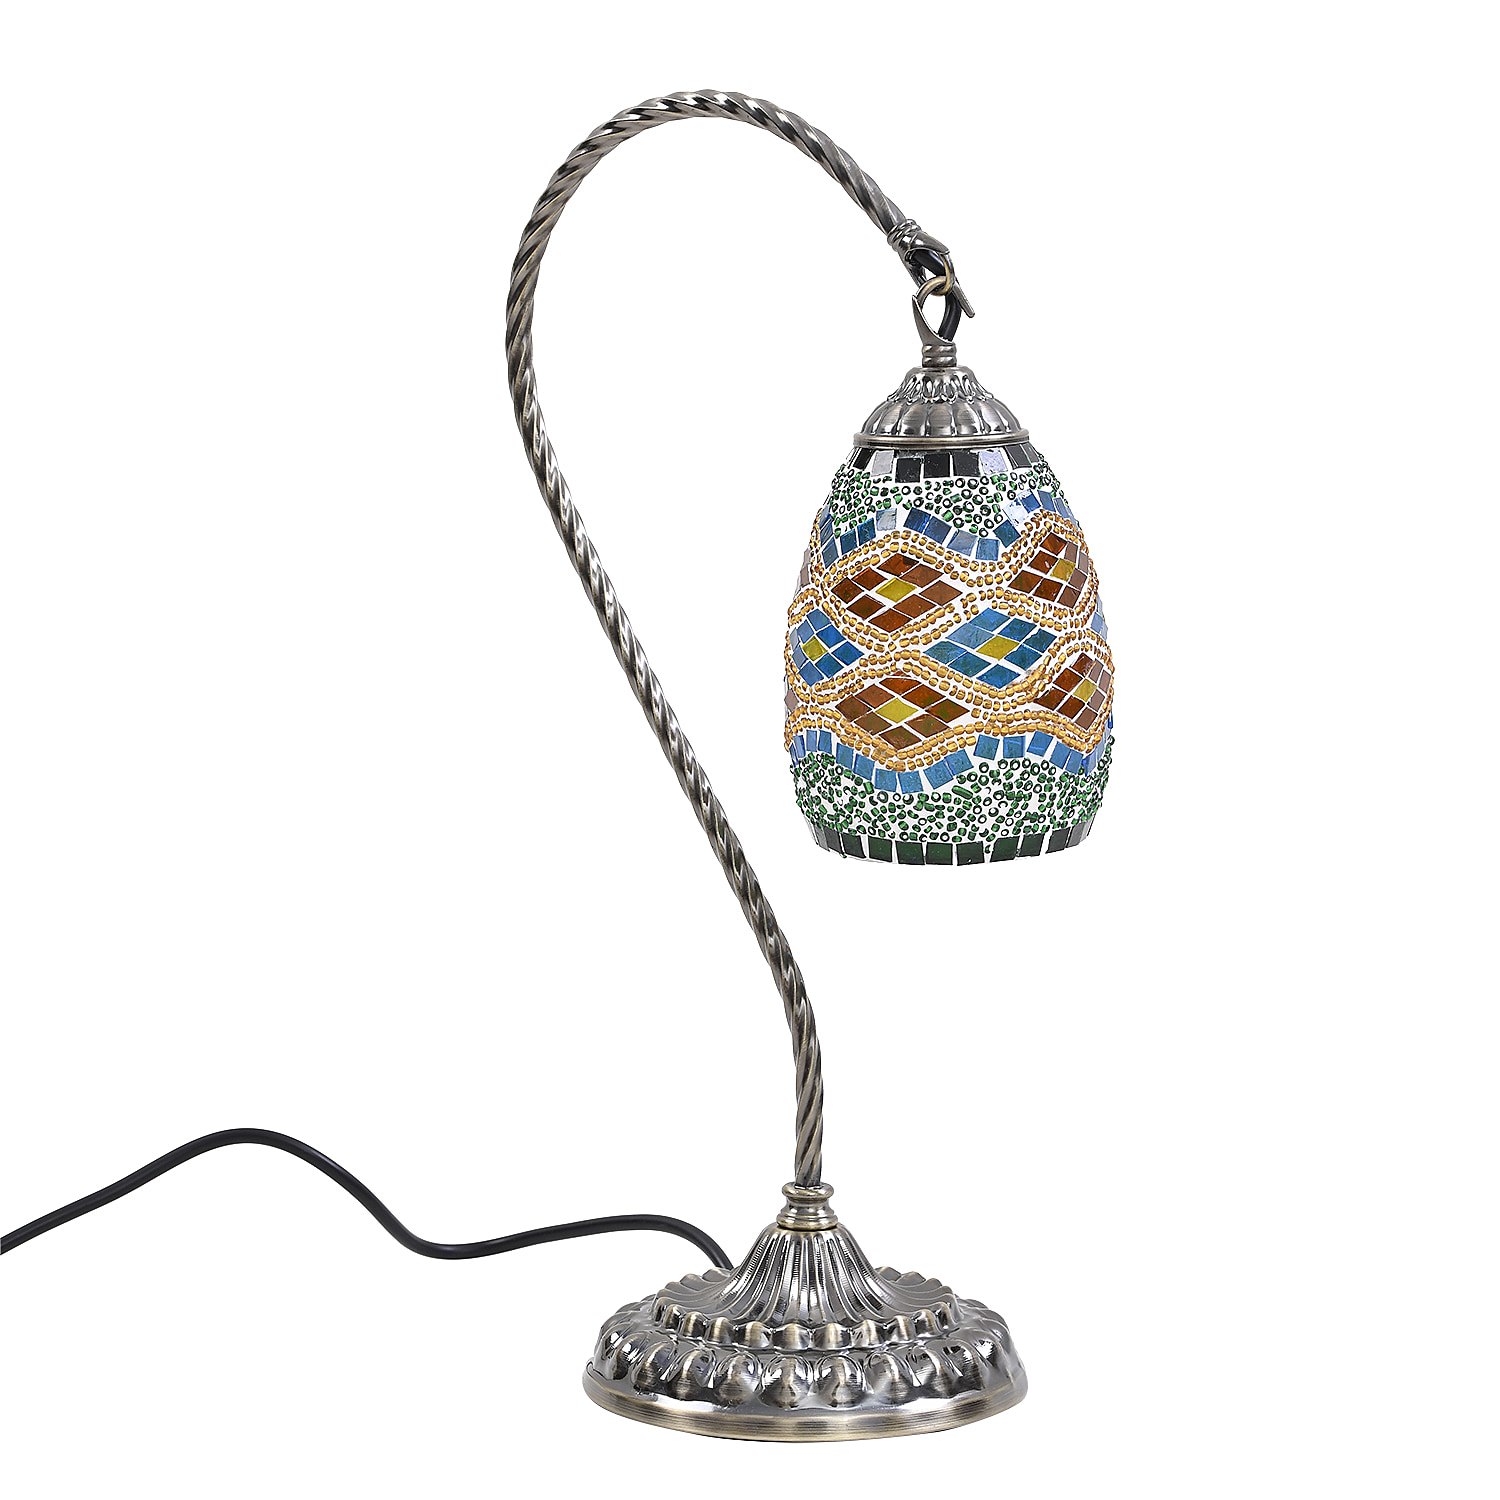 Handmade Turkish Mosaic  lampshade Shape Table Lamp for Home Décor, Office Décor and Bedroom Décor - Multi